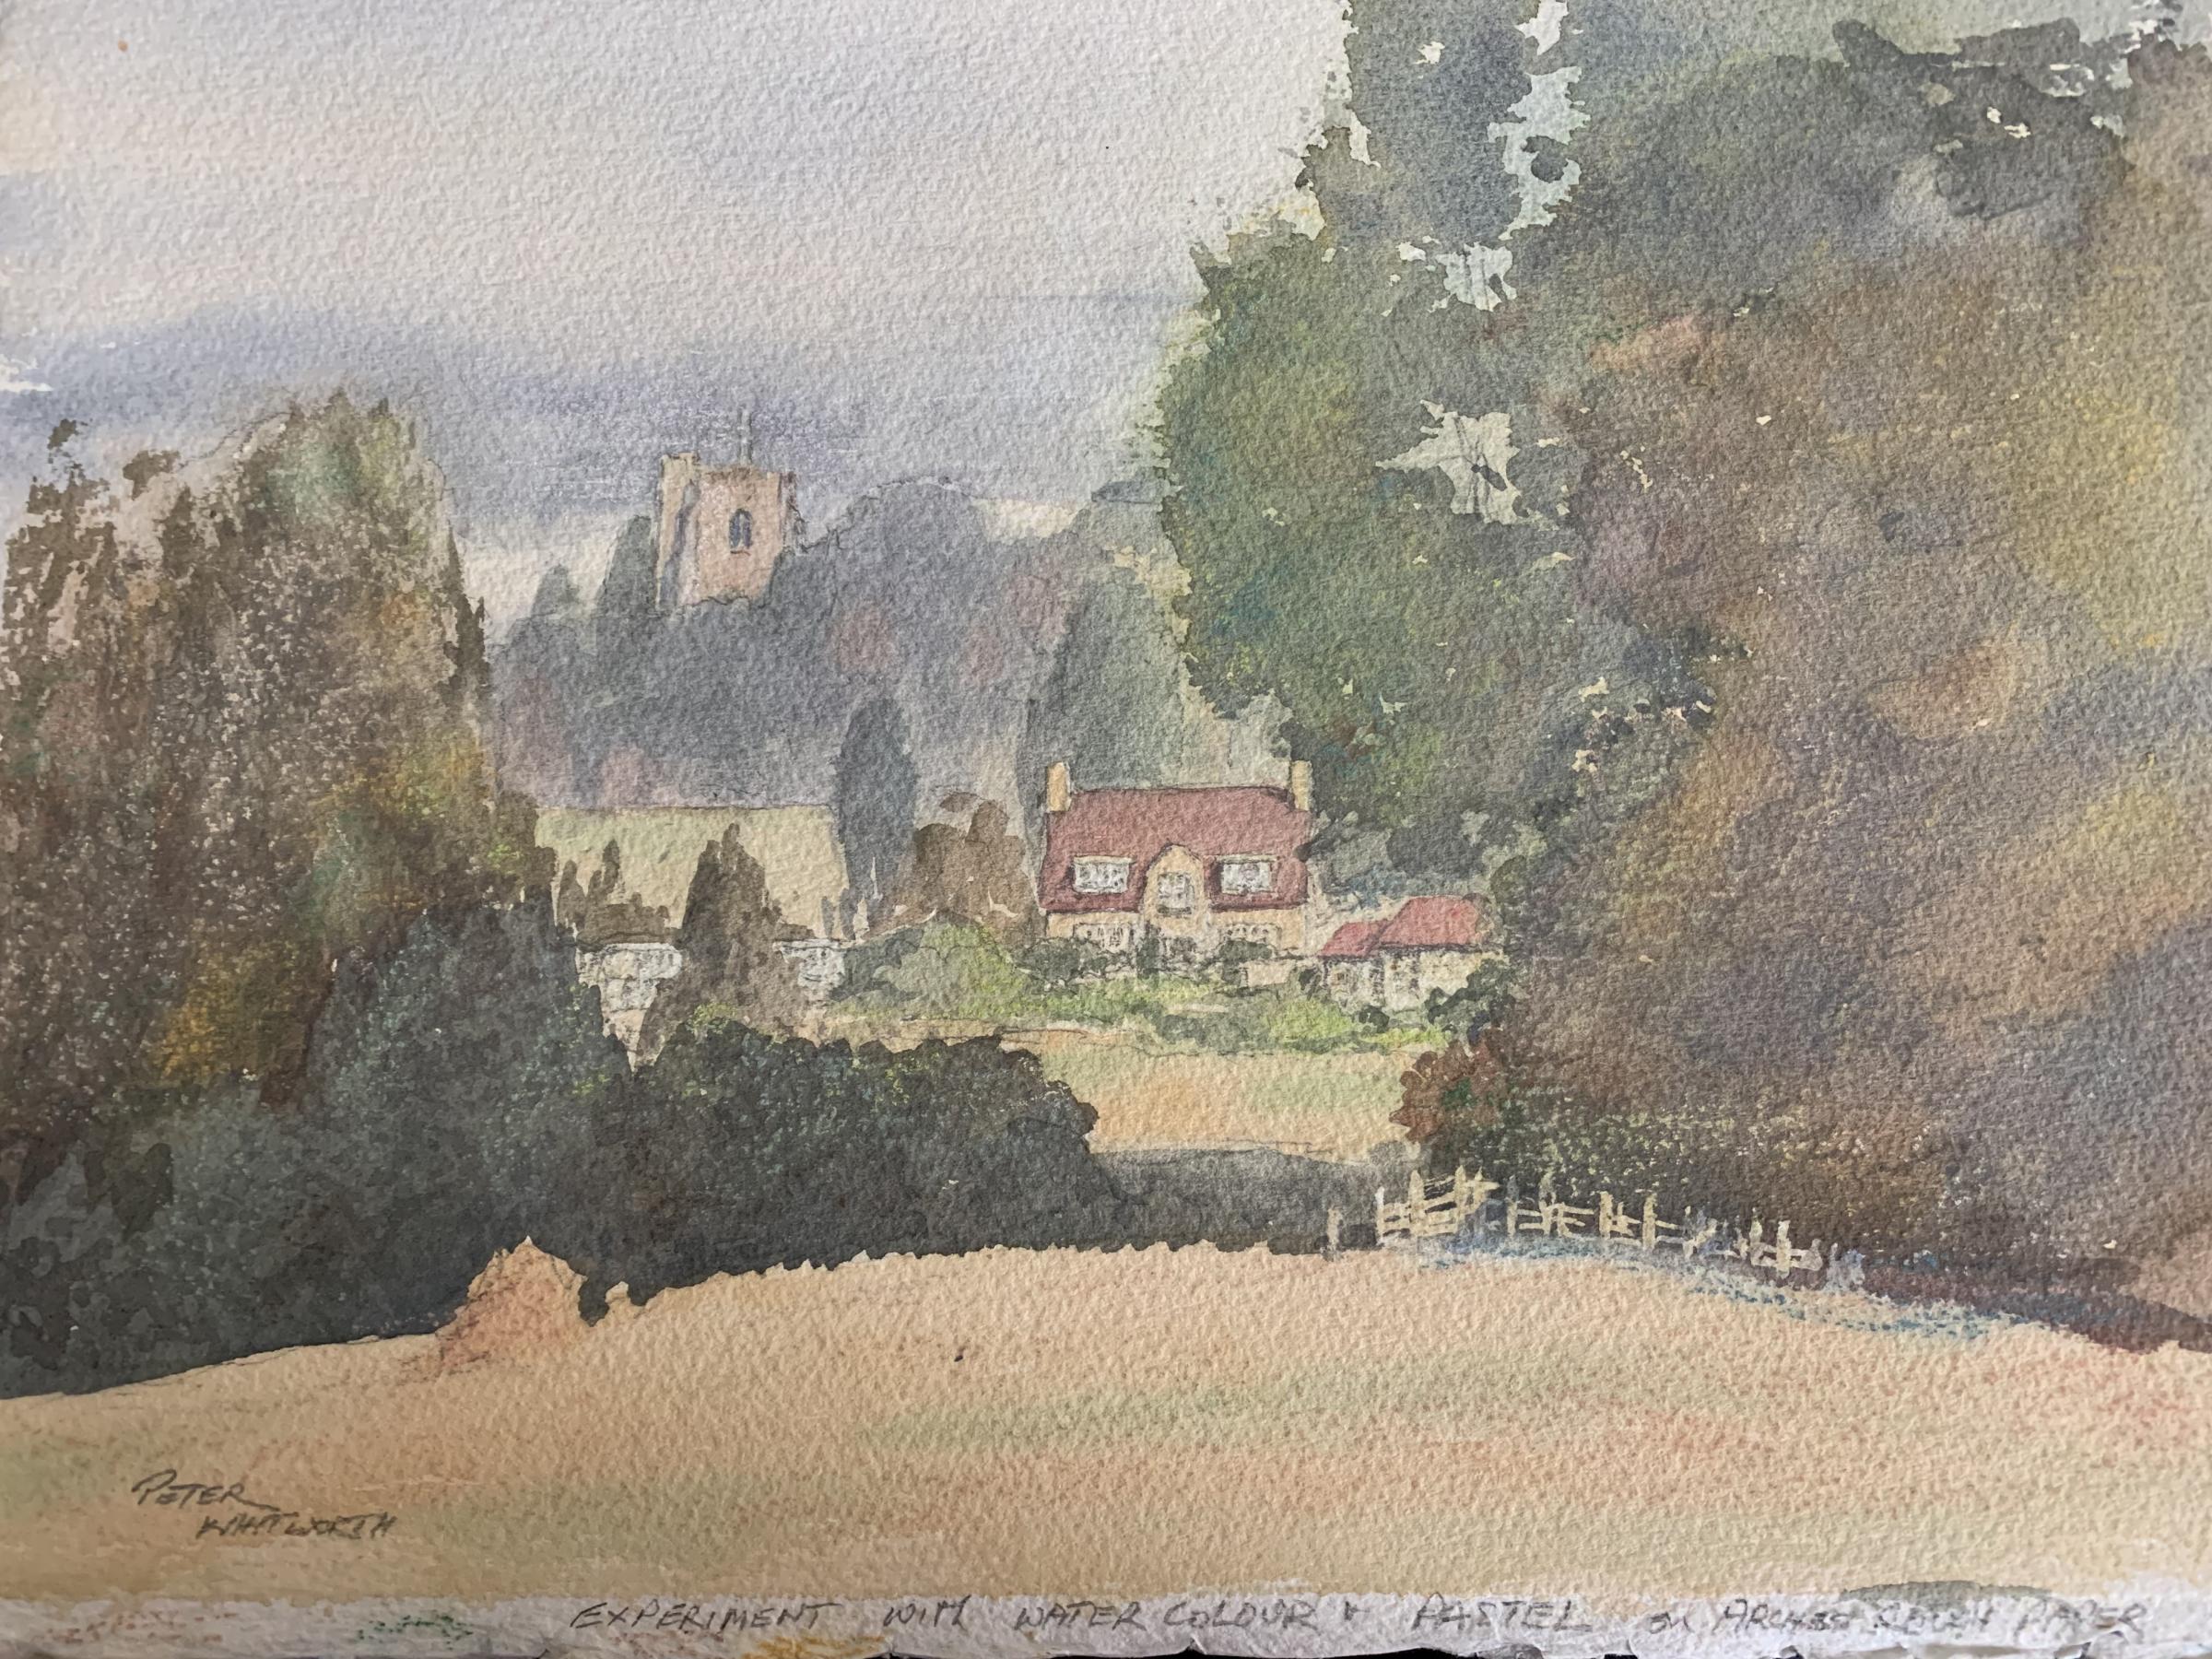 Peter Whitworth’s painting, looking towards Bushey from Attenborough’s fields